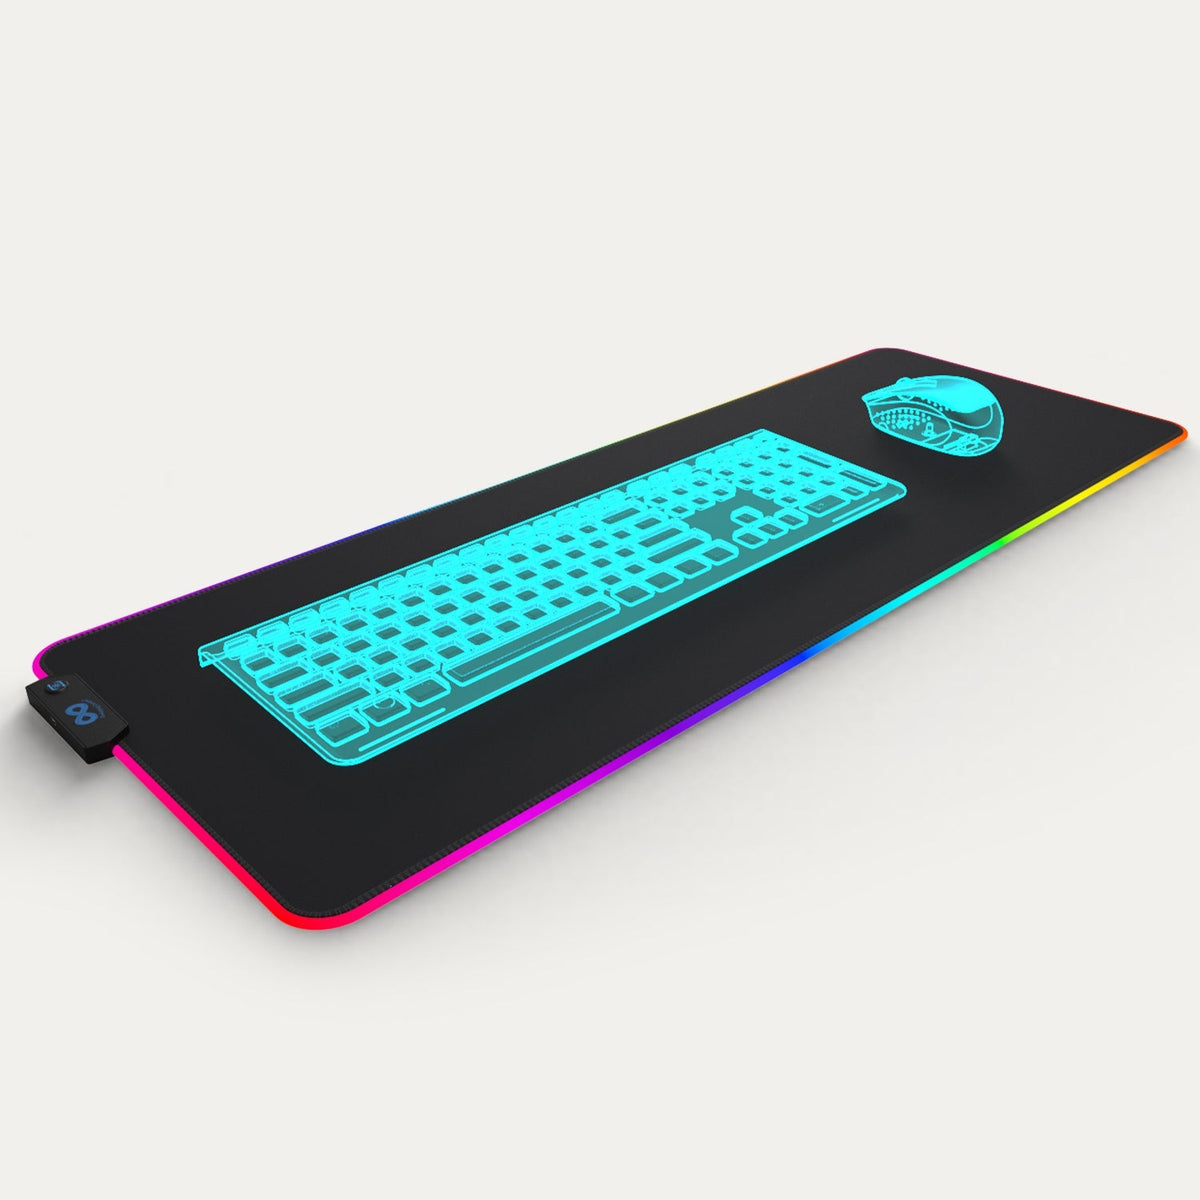  Everlasting Comfort Large Gaming Mouse Pad - Extra Long Desk Pad  with Mousepad Wrist Rest- 15 Color Modes with 2 Brightness Levels - RGB Mouse  Pad for Gamers - XL, Big